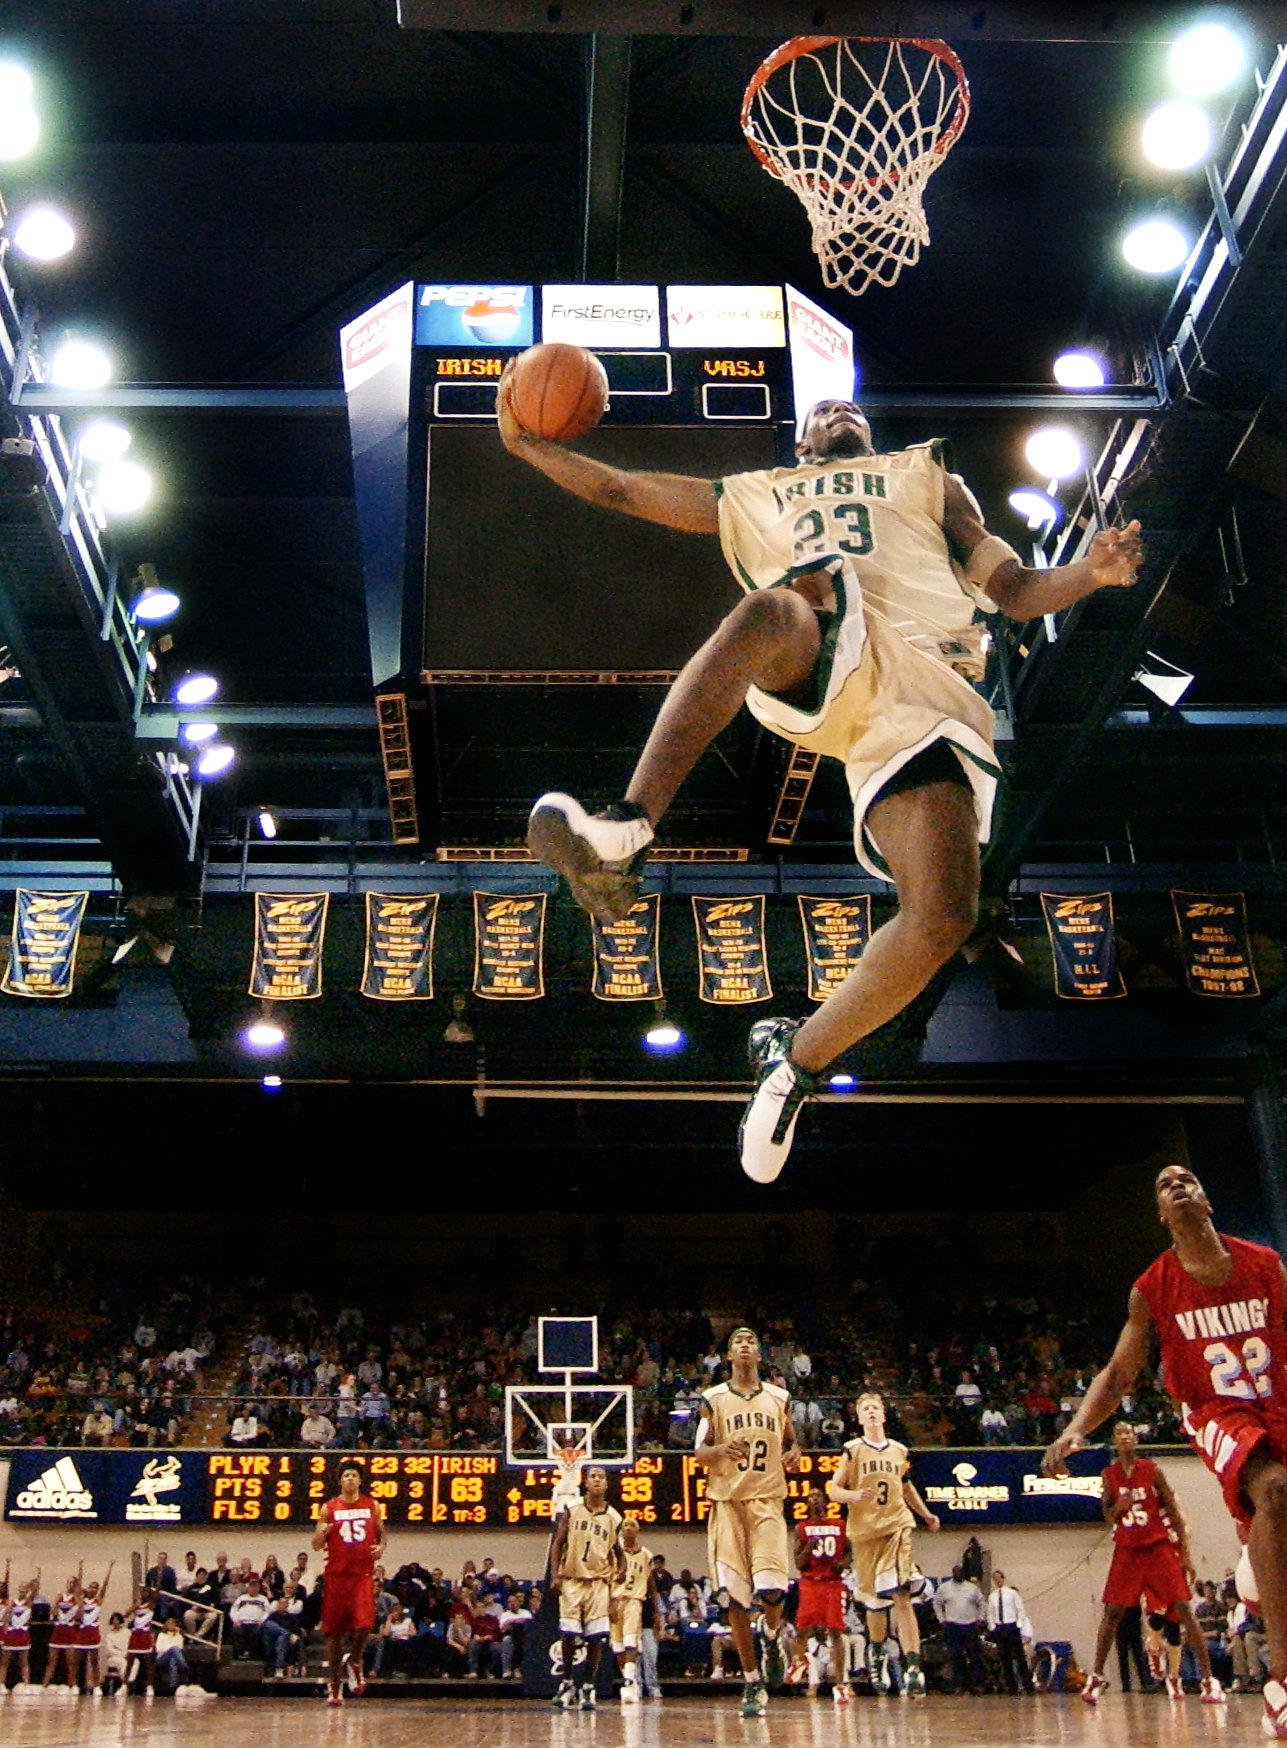 St. Vincent-St. Mary's LeBron James go skyward to slam an easy two points during the third period against Villa Angela St. Joes January 7, 2003 at Akron University's Rhodes Arena.  SVSJ won their game by a landslide with a score of 97-60 and LeBron said that was his best ariel slam dunk in his career.   (John Kuntz/The Plain Dealer)  